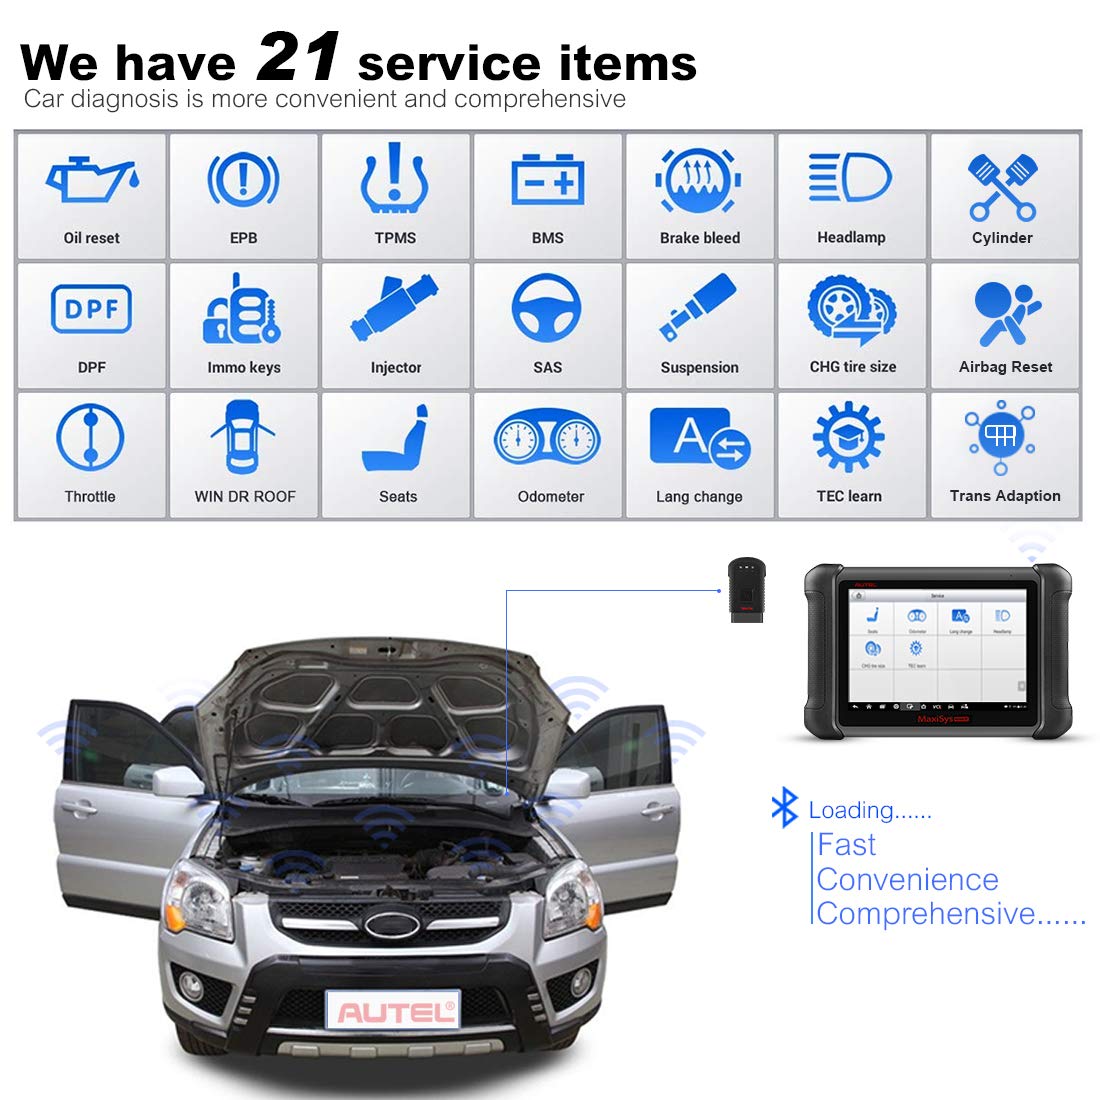 Autel Maxisys MS906BT Bluetooth Automotive Diagnostic Tool with OE-Level Diagnostics and ECU Coding Capability.Oil Reset Service.TPMS.EPB.ABS/SRS.SAS.DPF.Upgraded Version of DS808/MS906/MK808